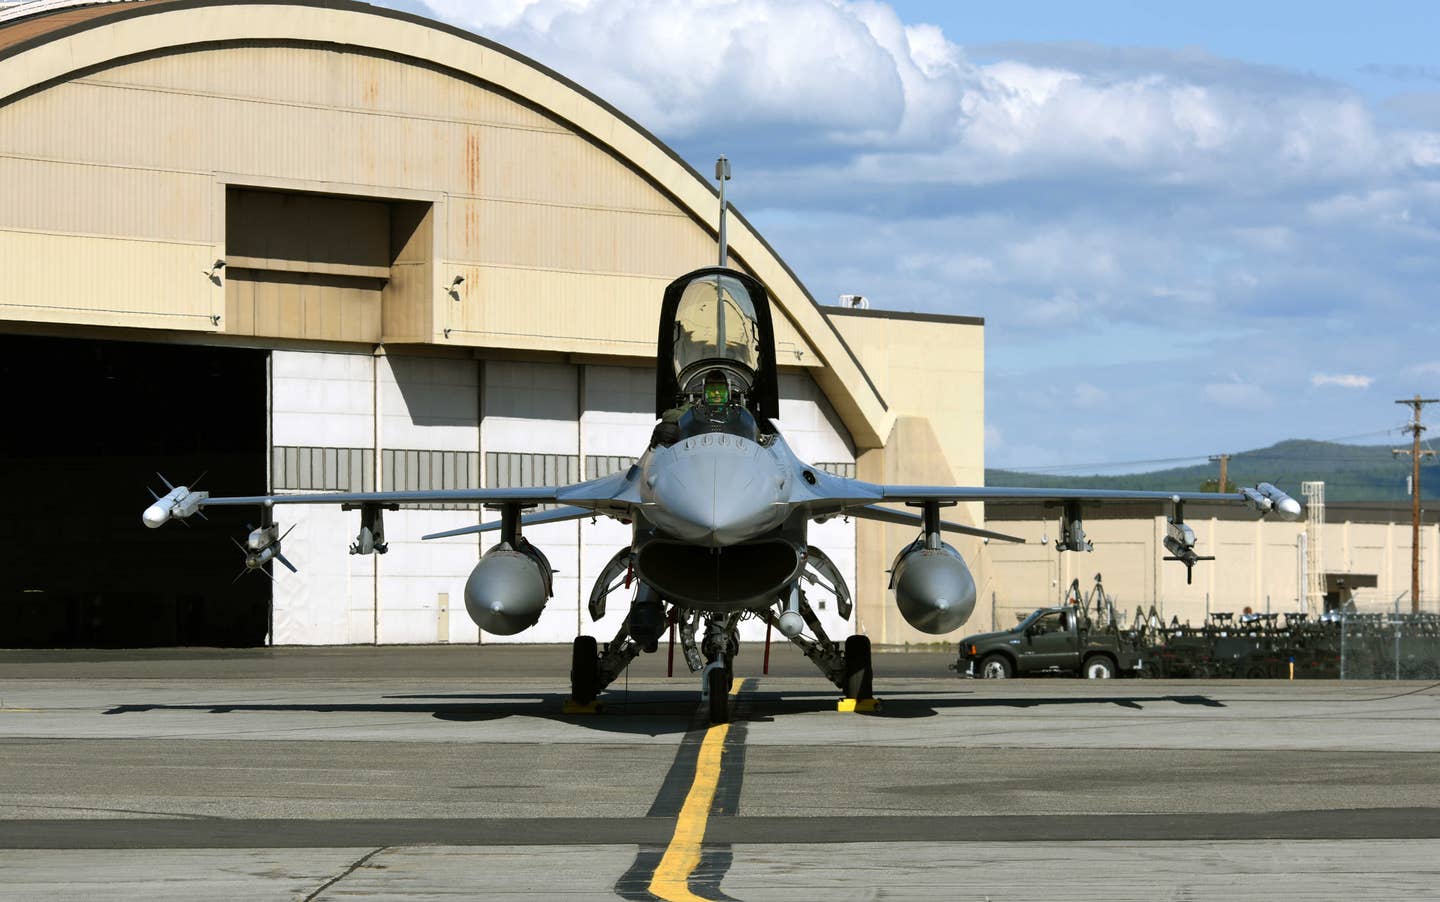 Airmen from the 180th Fighter Wing, Ohio Air National Guard, participated in Red Flag Alaska, a national exercise aimed to provide high-intensity combat training for pilots in a controlled environment at Eielson Air Force Base, Fairbanks, Alaska, in May 2015. (U.S. Air National Guard photo by 1st Lt. Jordyn Sadowski)